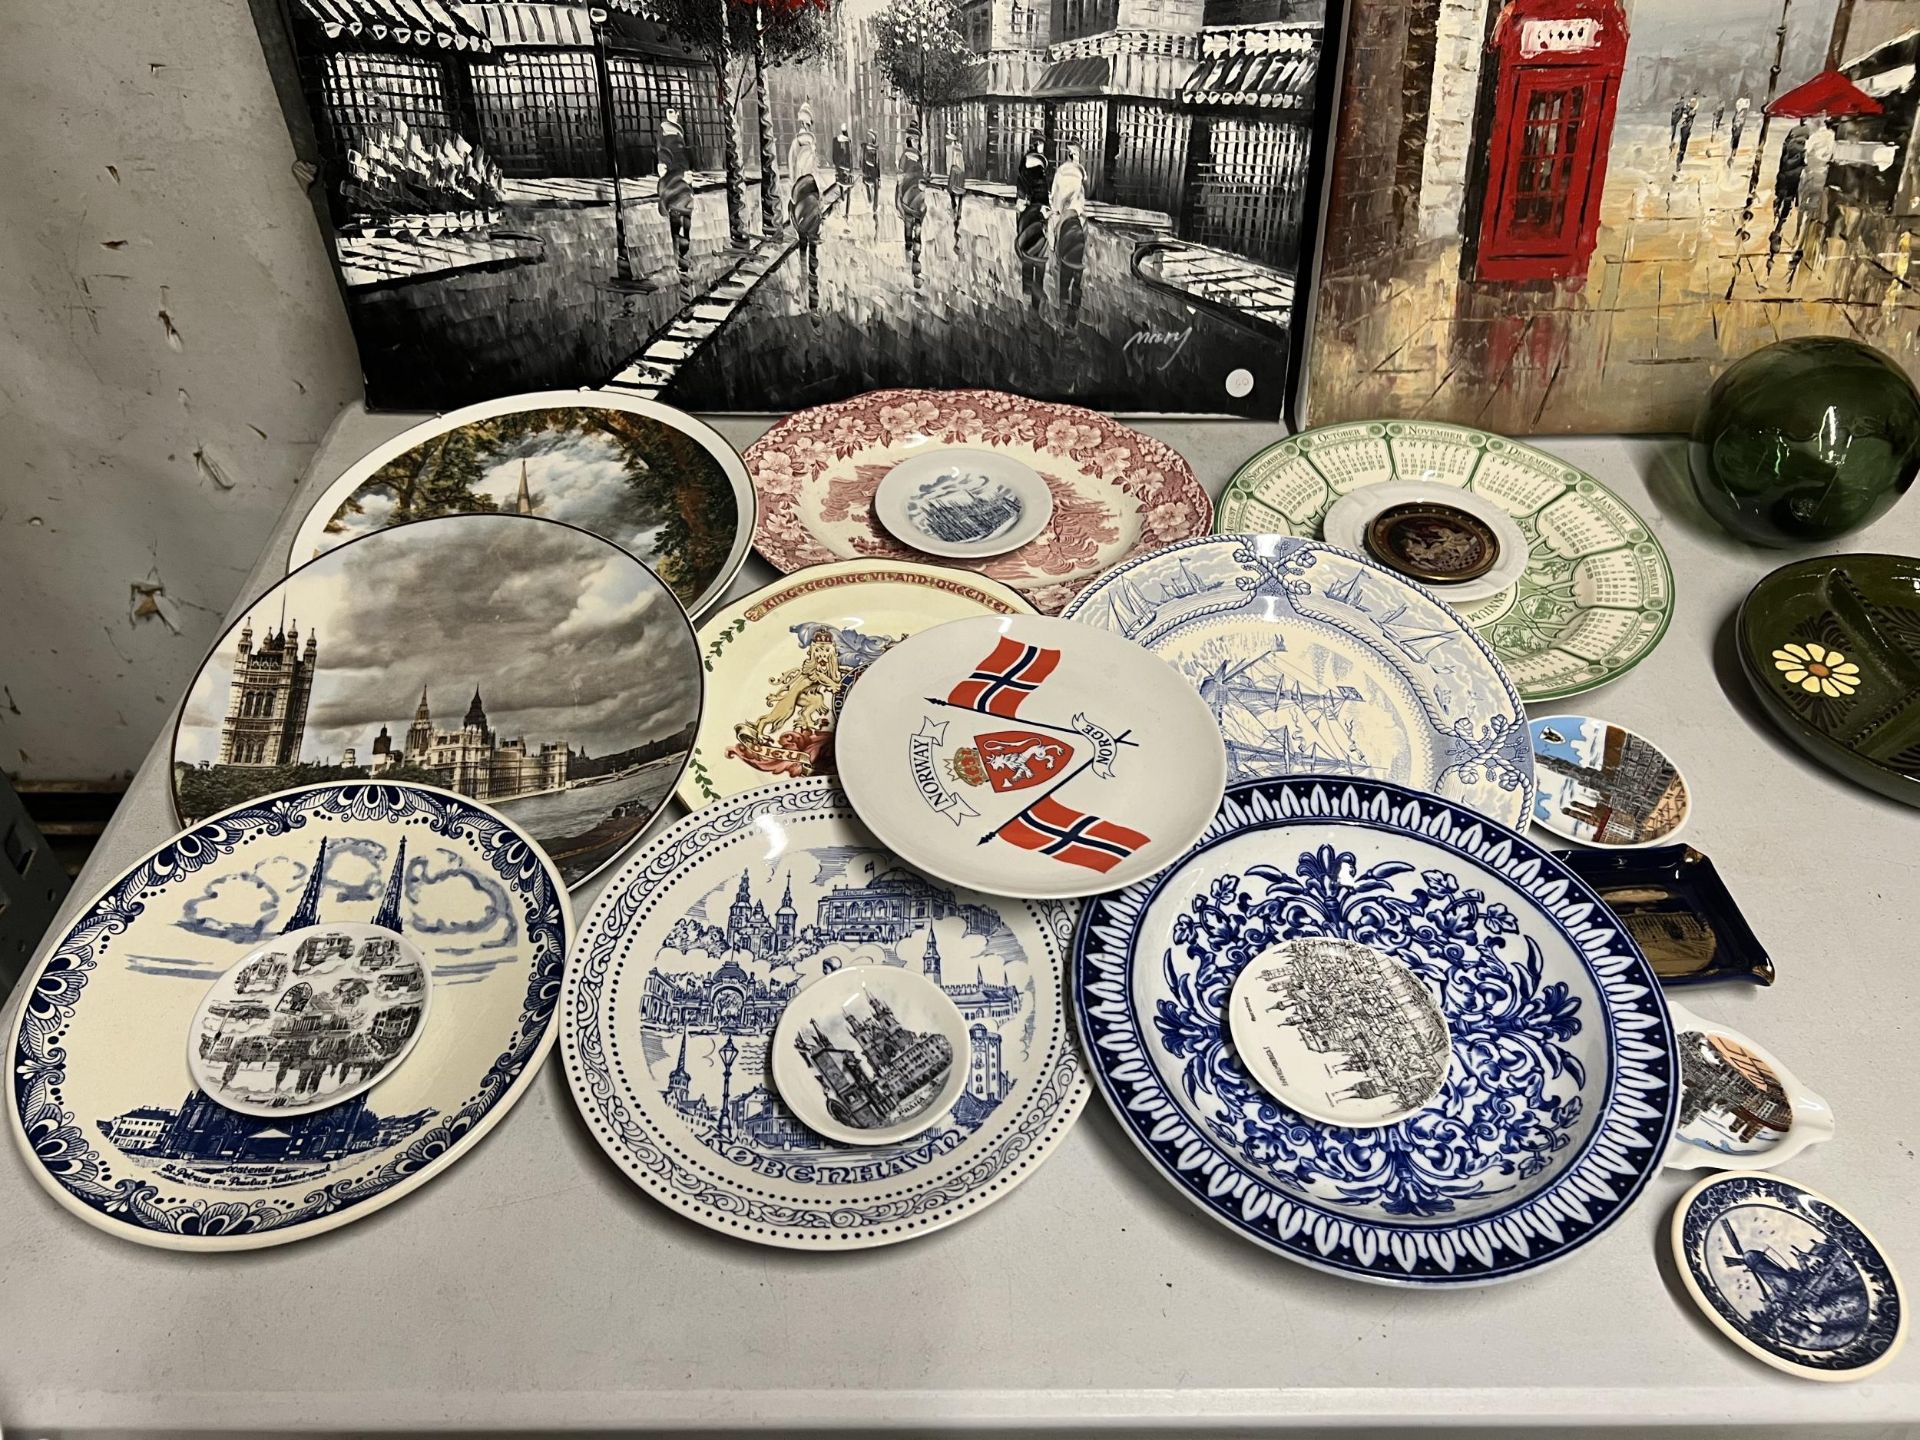 A LARGE QUANTITY OF TEN SMALL AND TEN LARGE VINTAGE PLATES